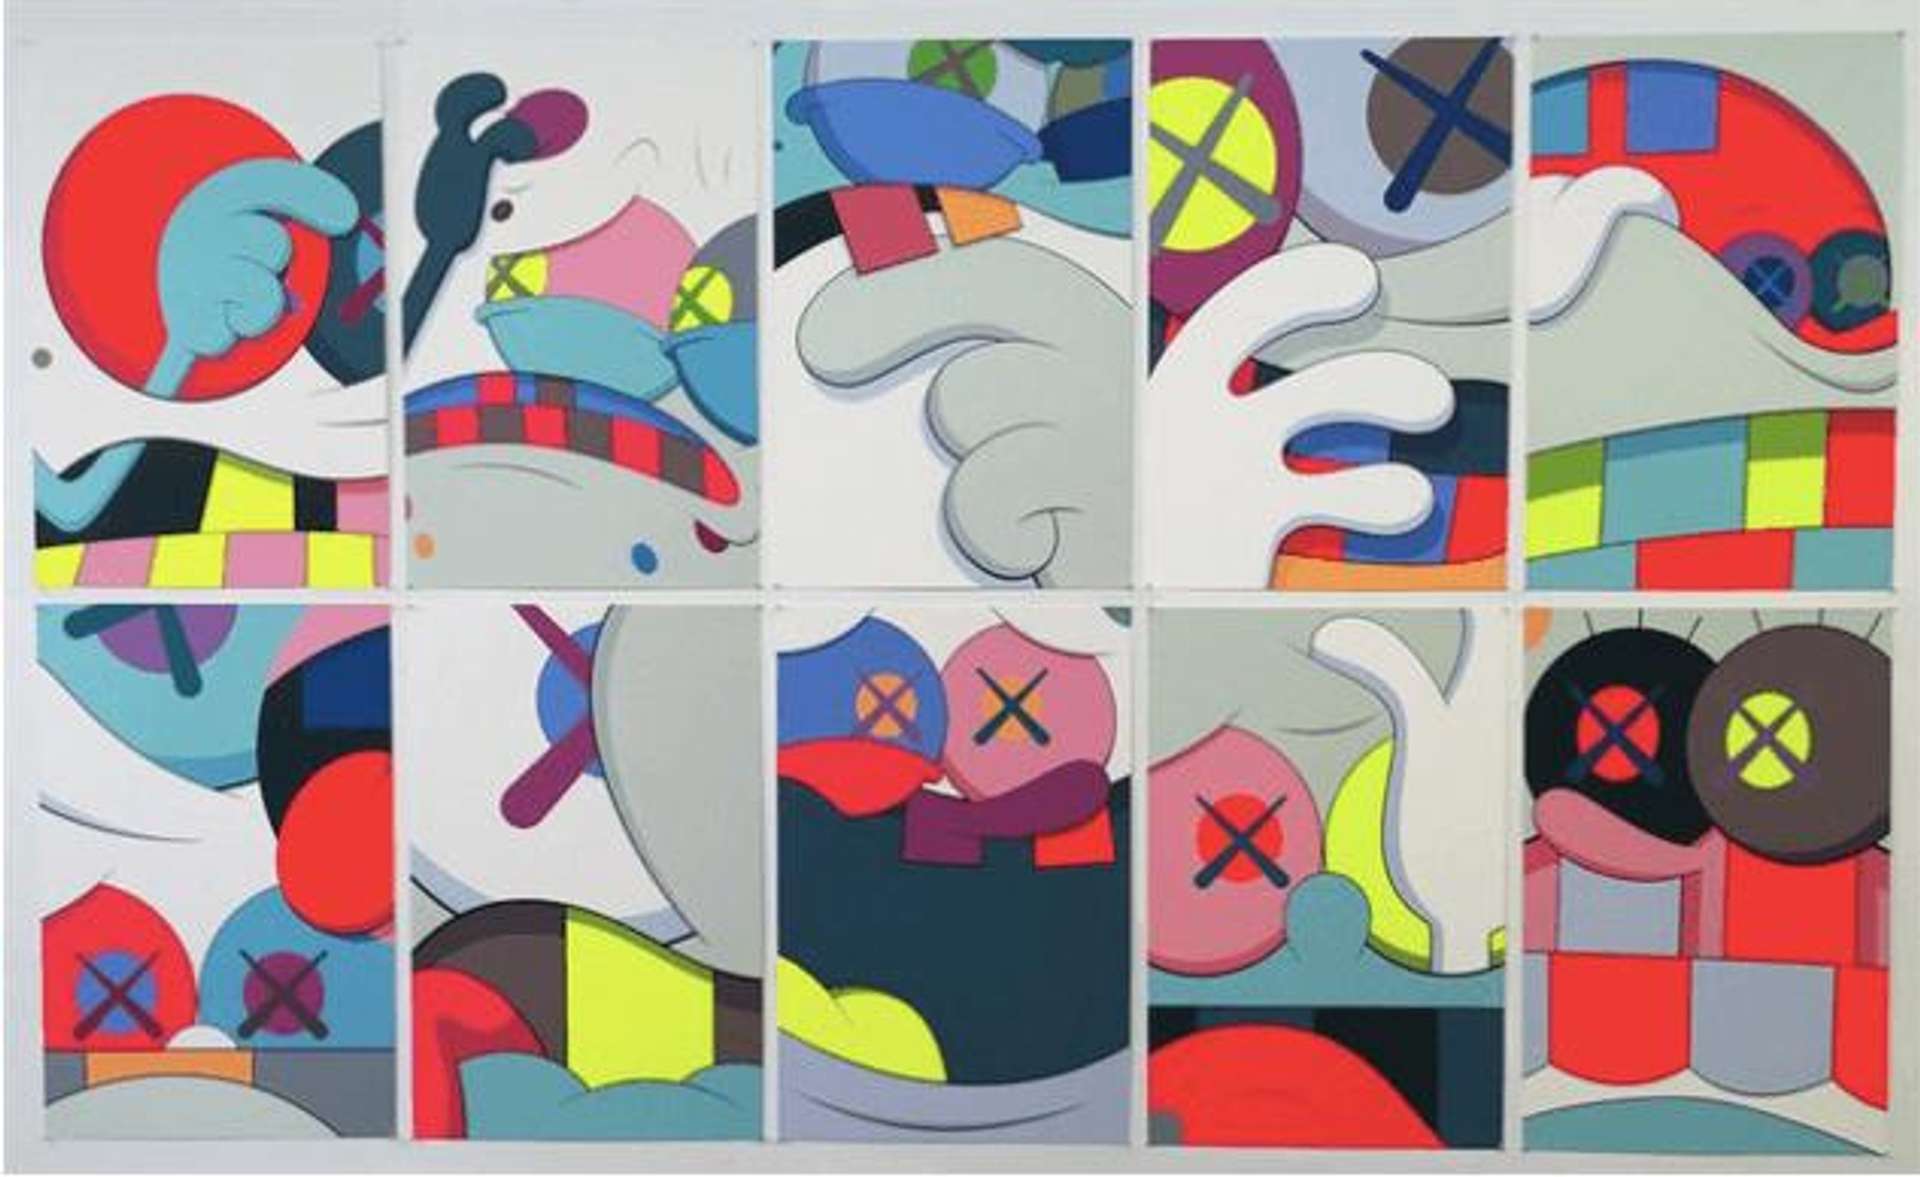 Blame Game (complete set) by KAWS